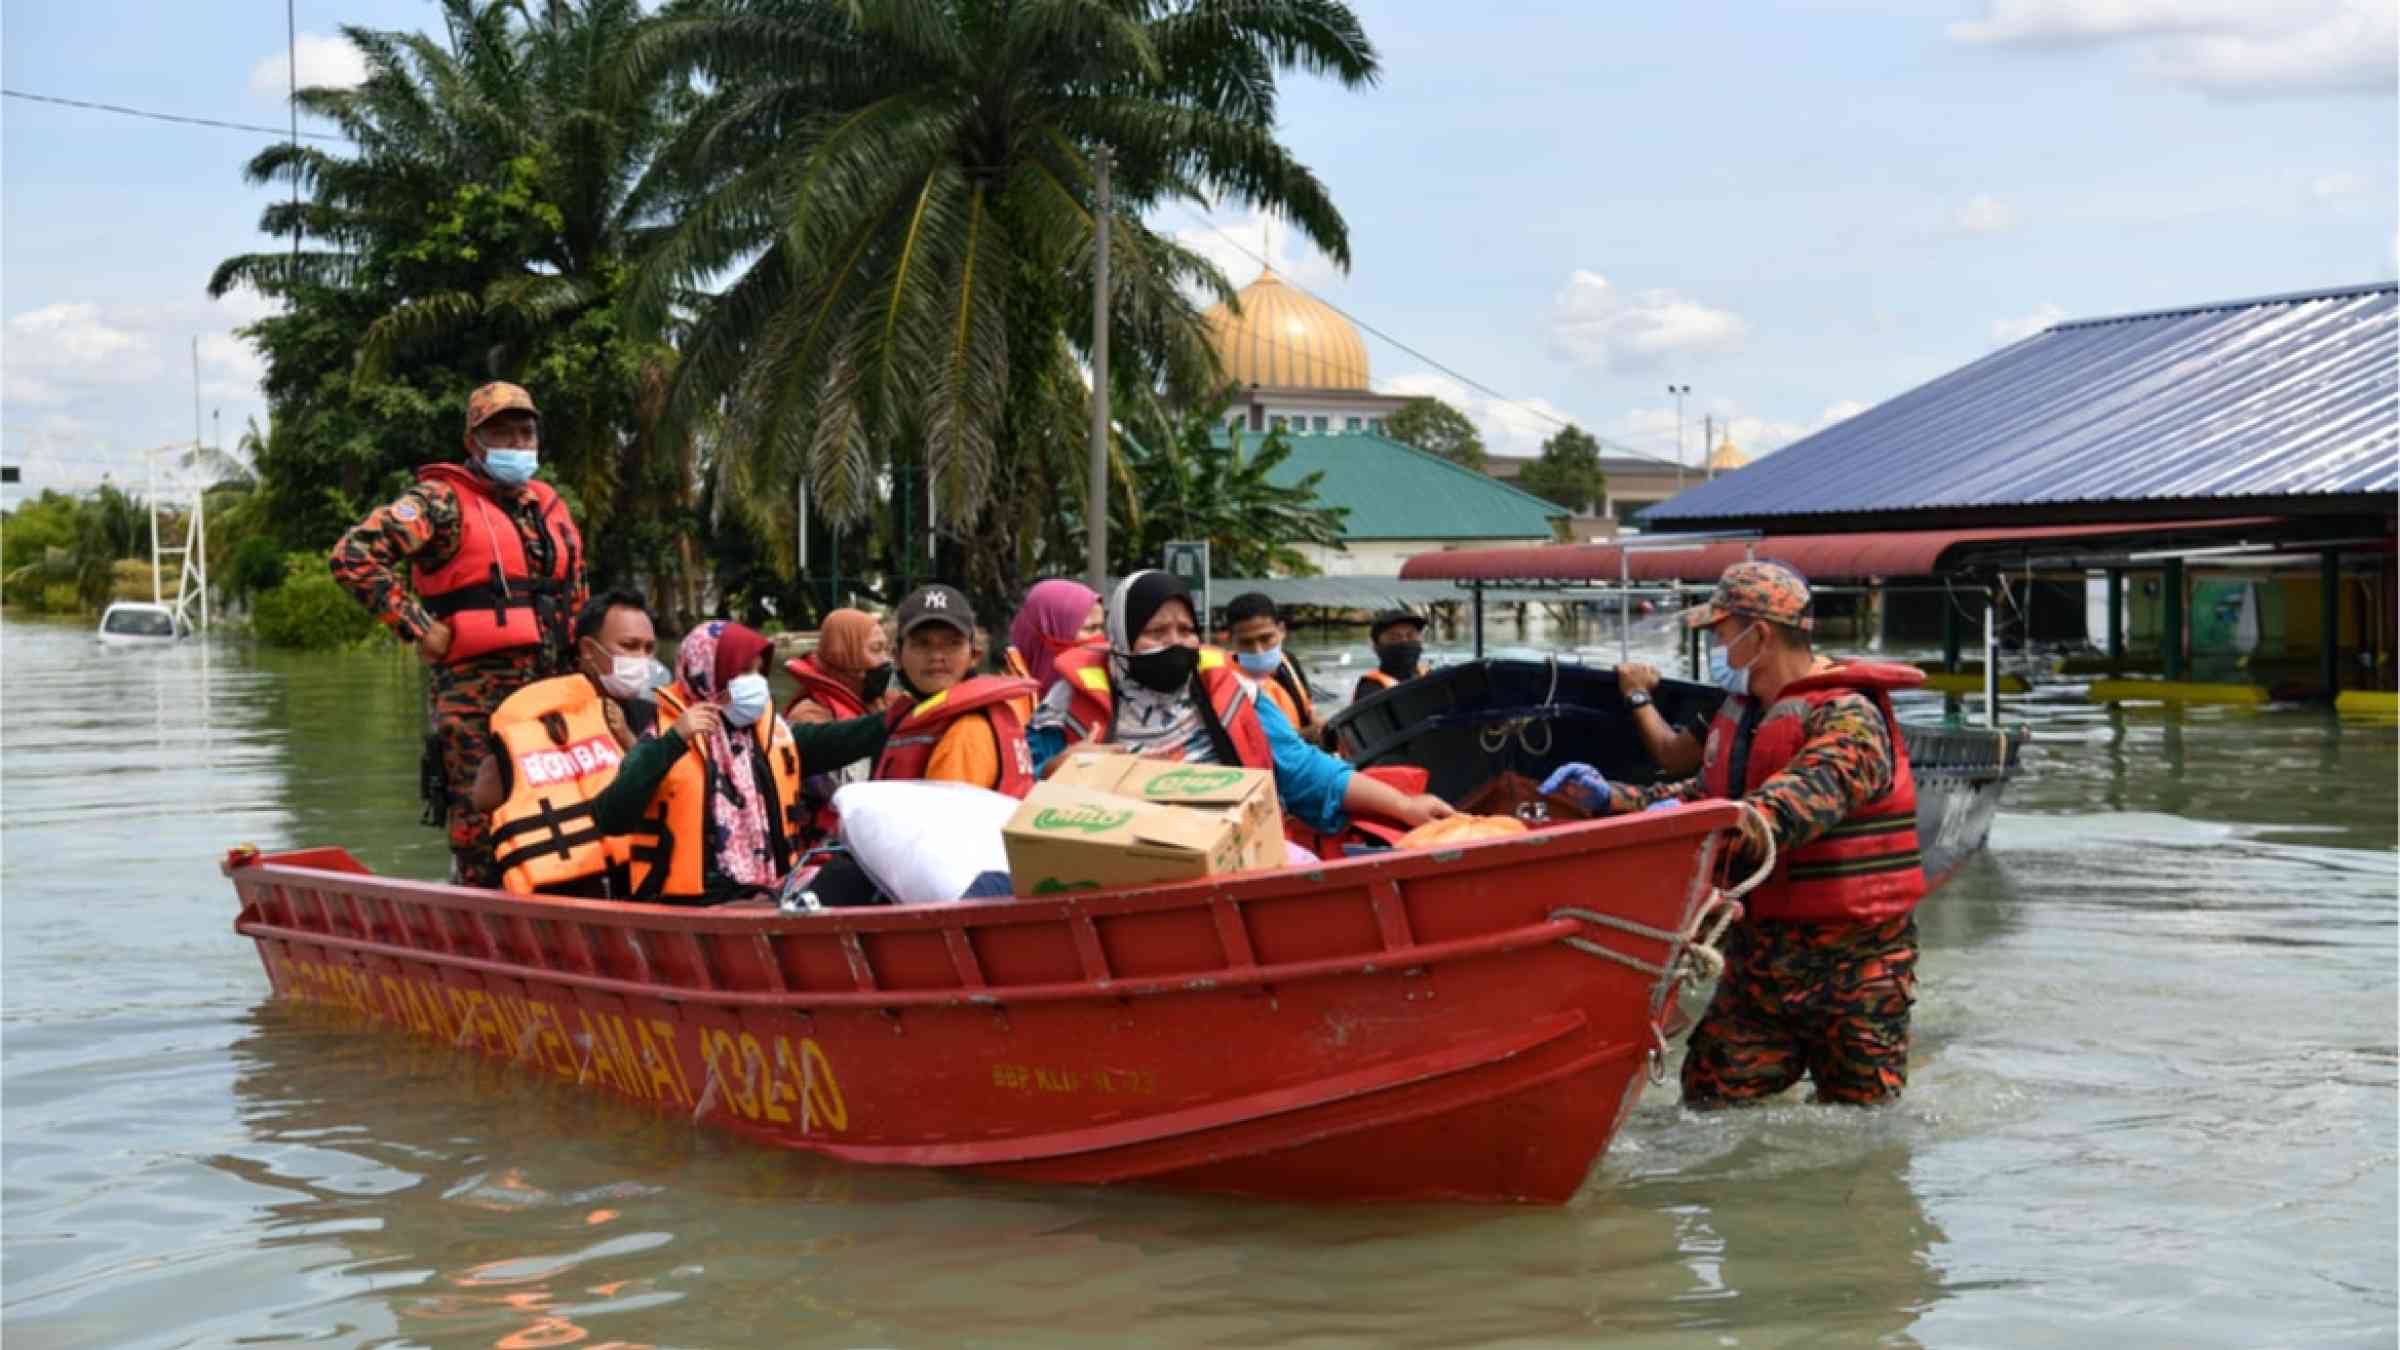 A boat filled with people who are being rescued from the floods in Malaysia.